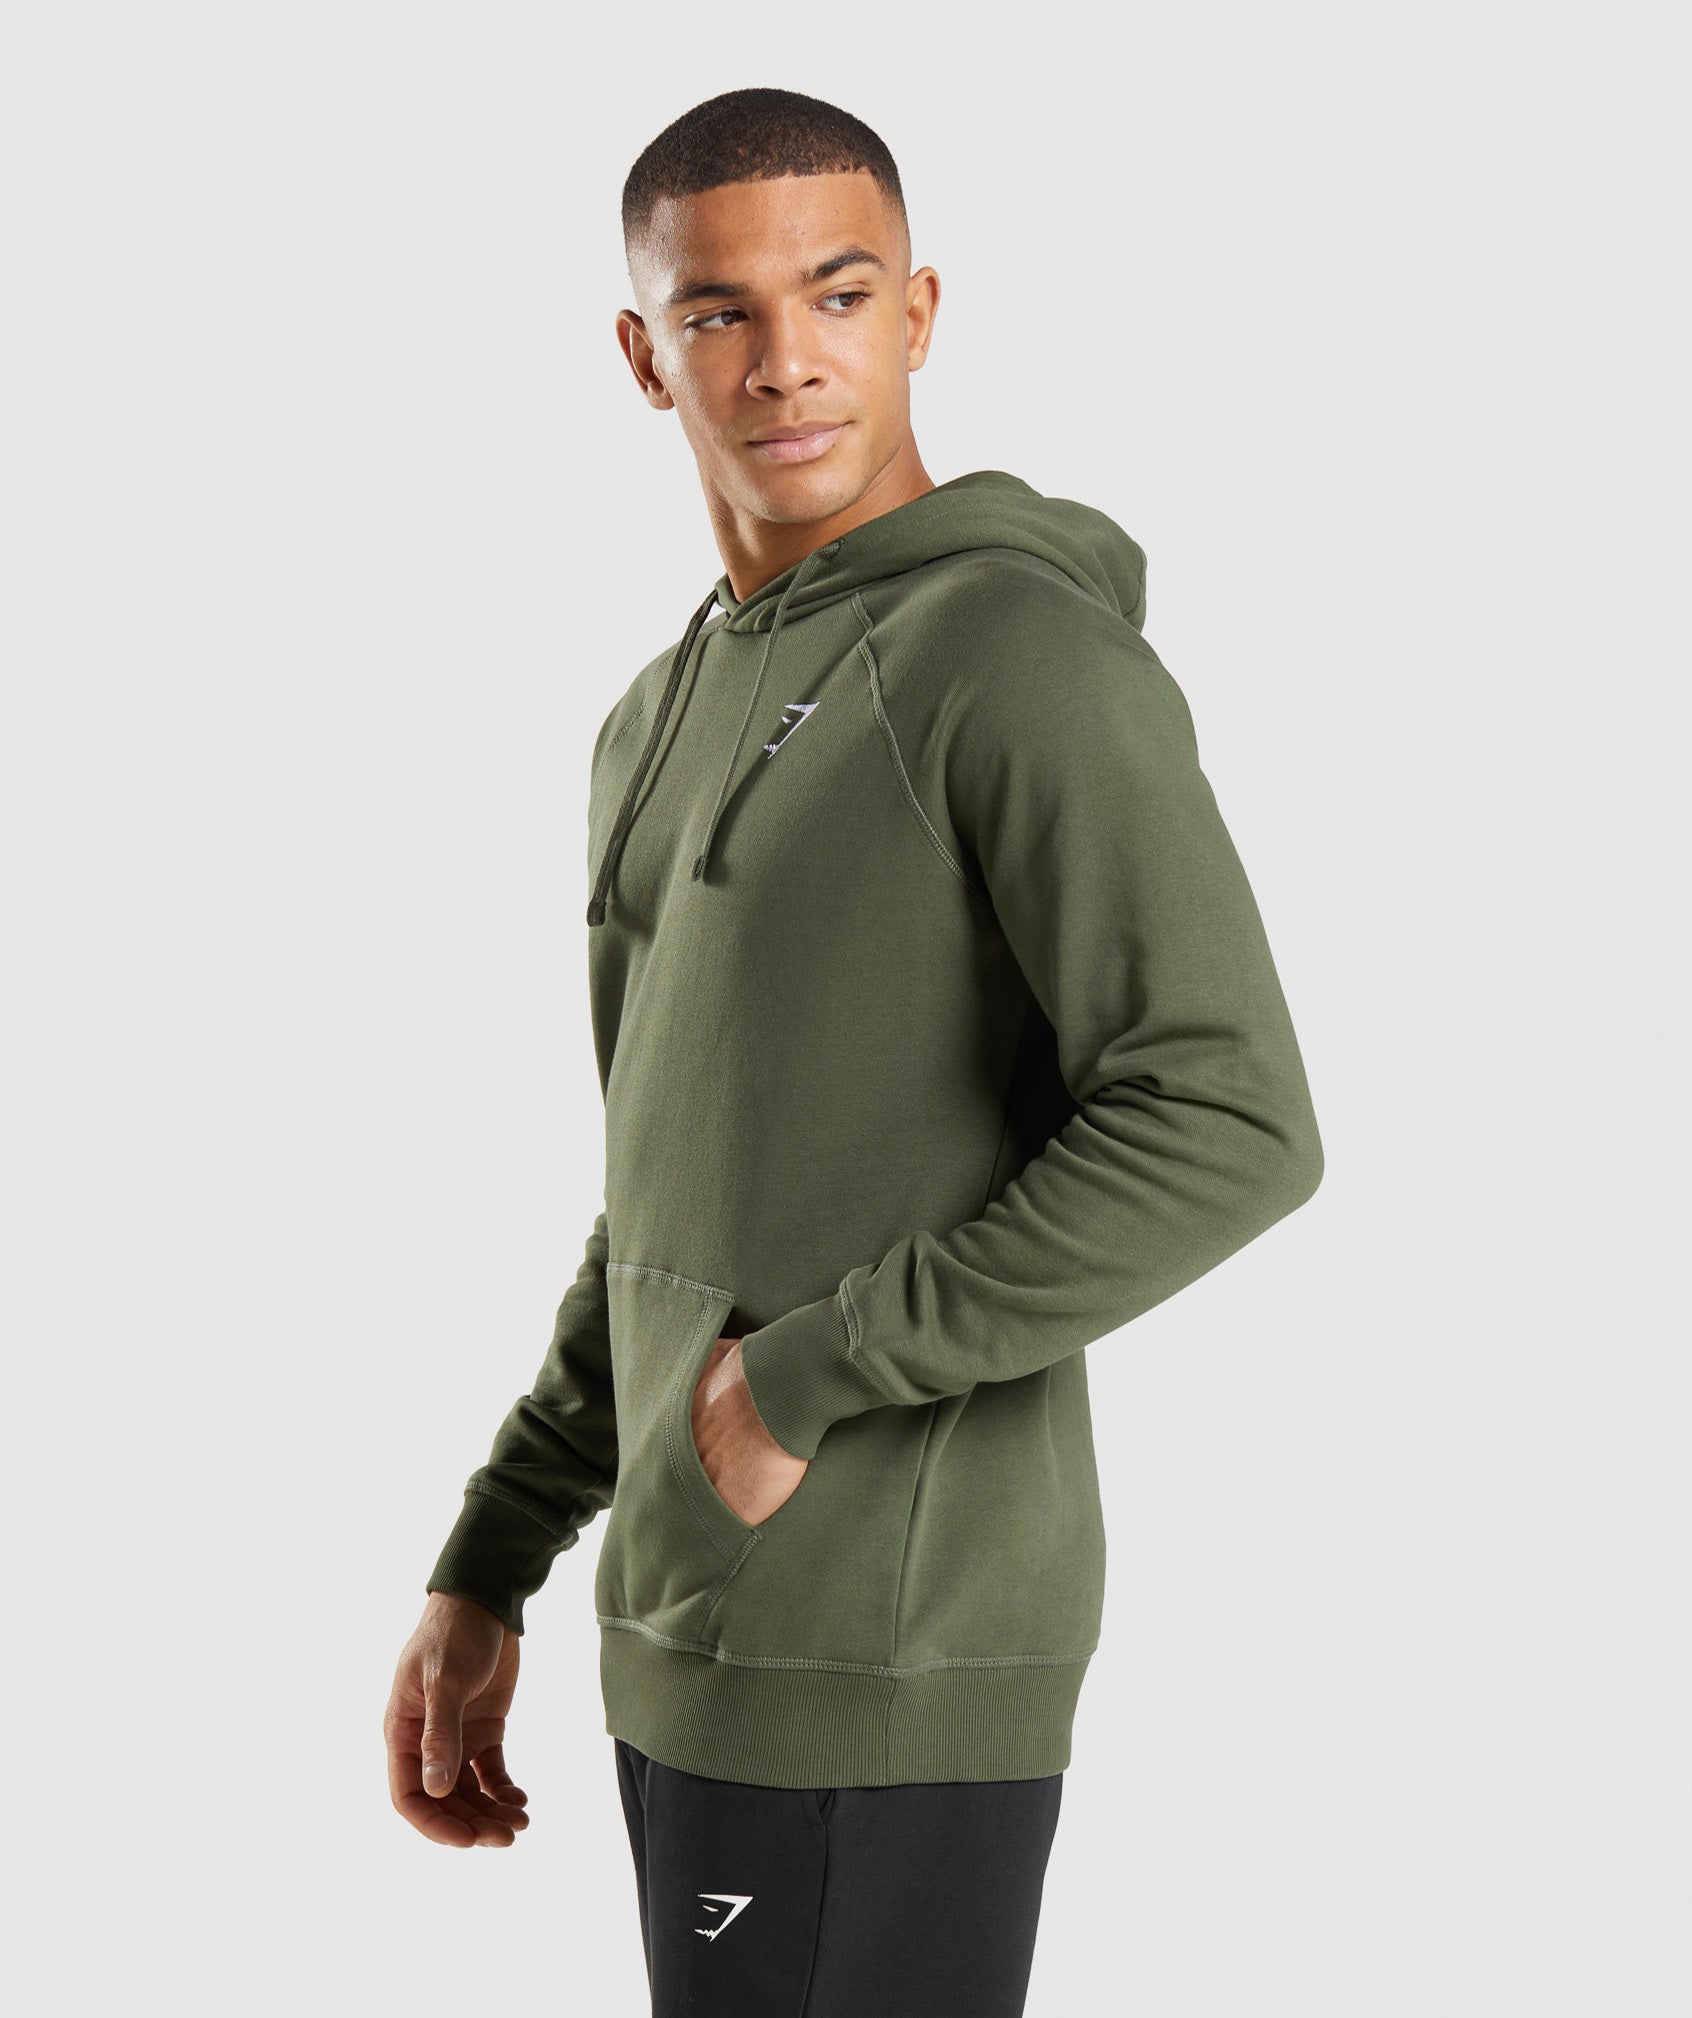 Crest Hoodie in Core Olive